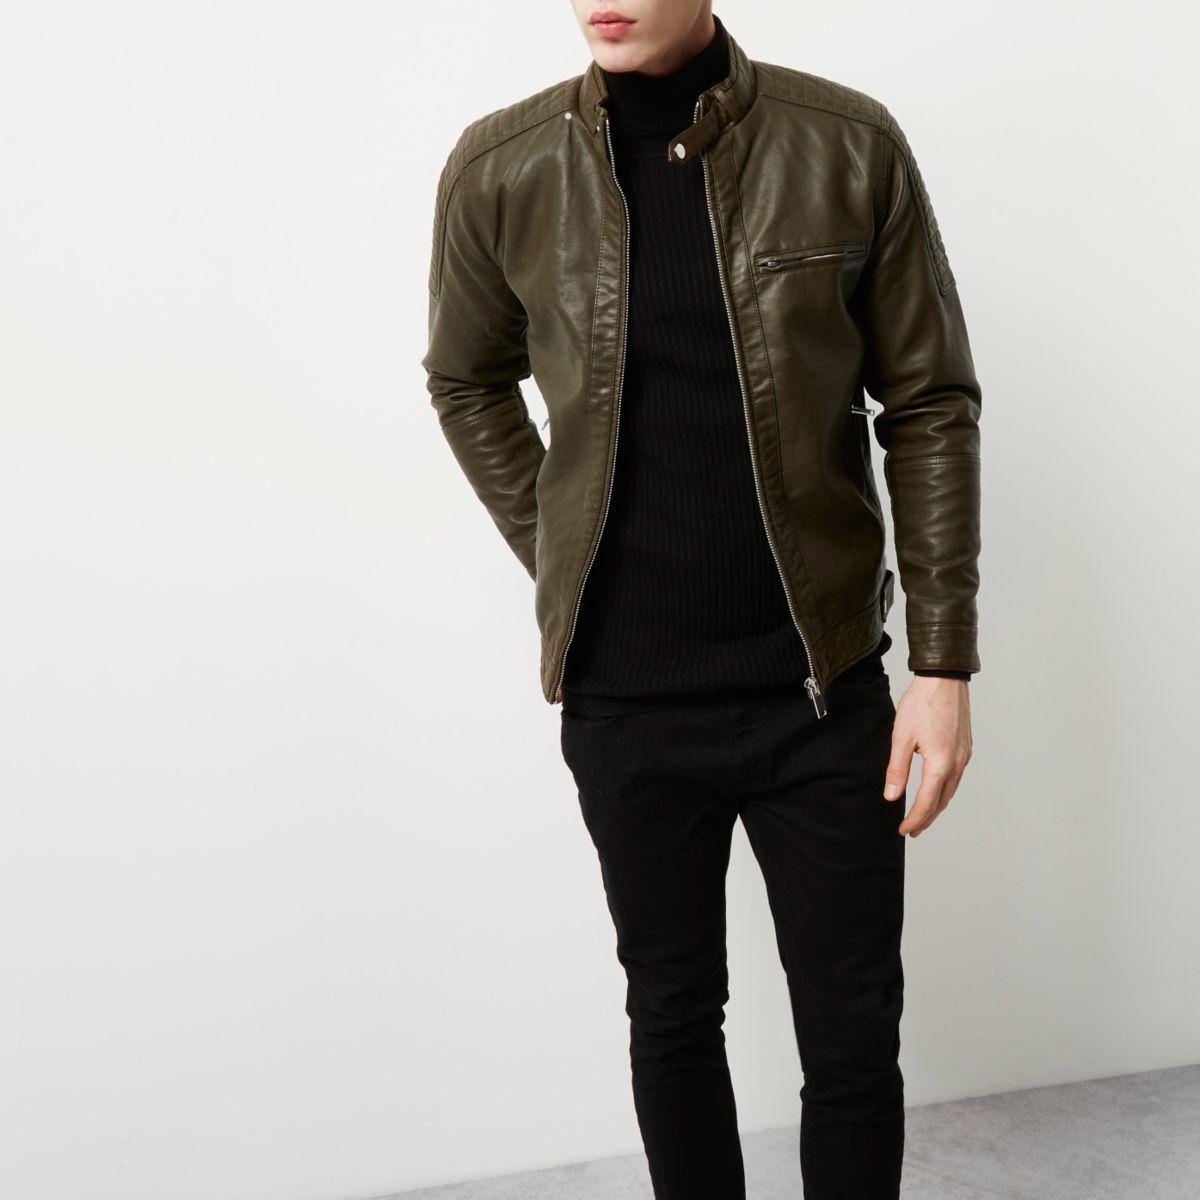 Lyst - River Island Racer Neck Faux-leather Jacket in Green for Men